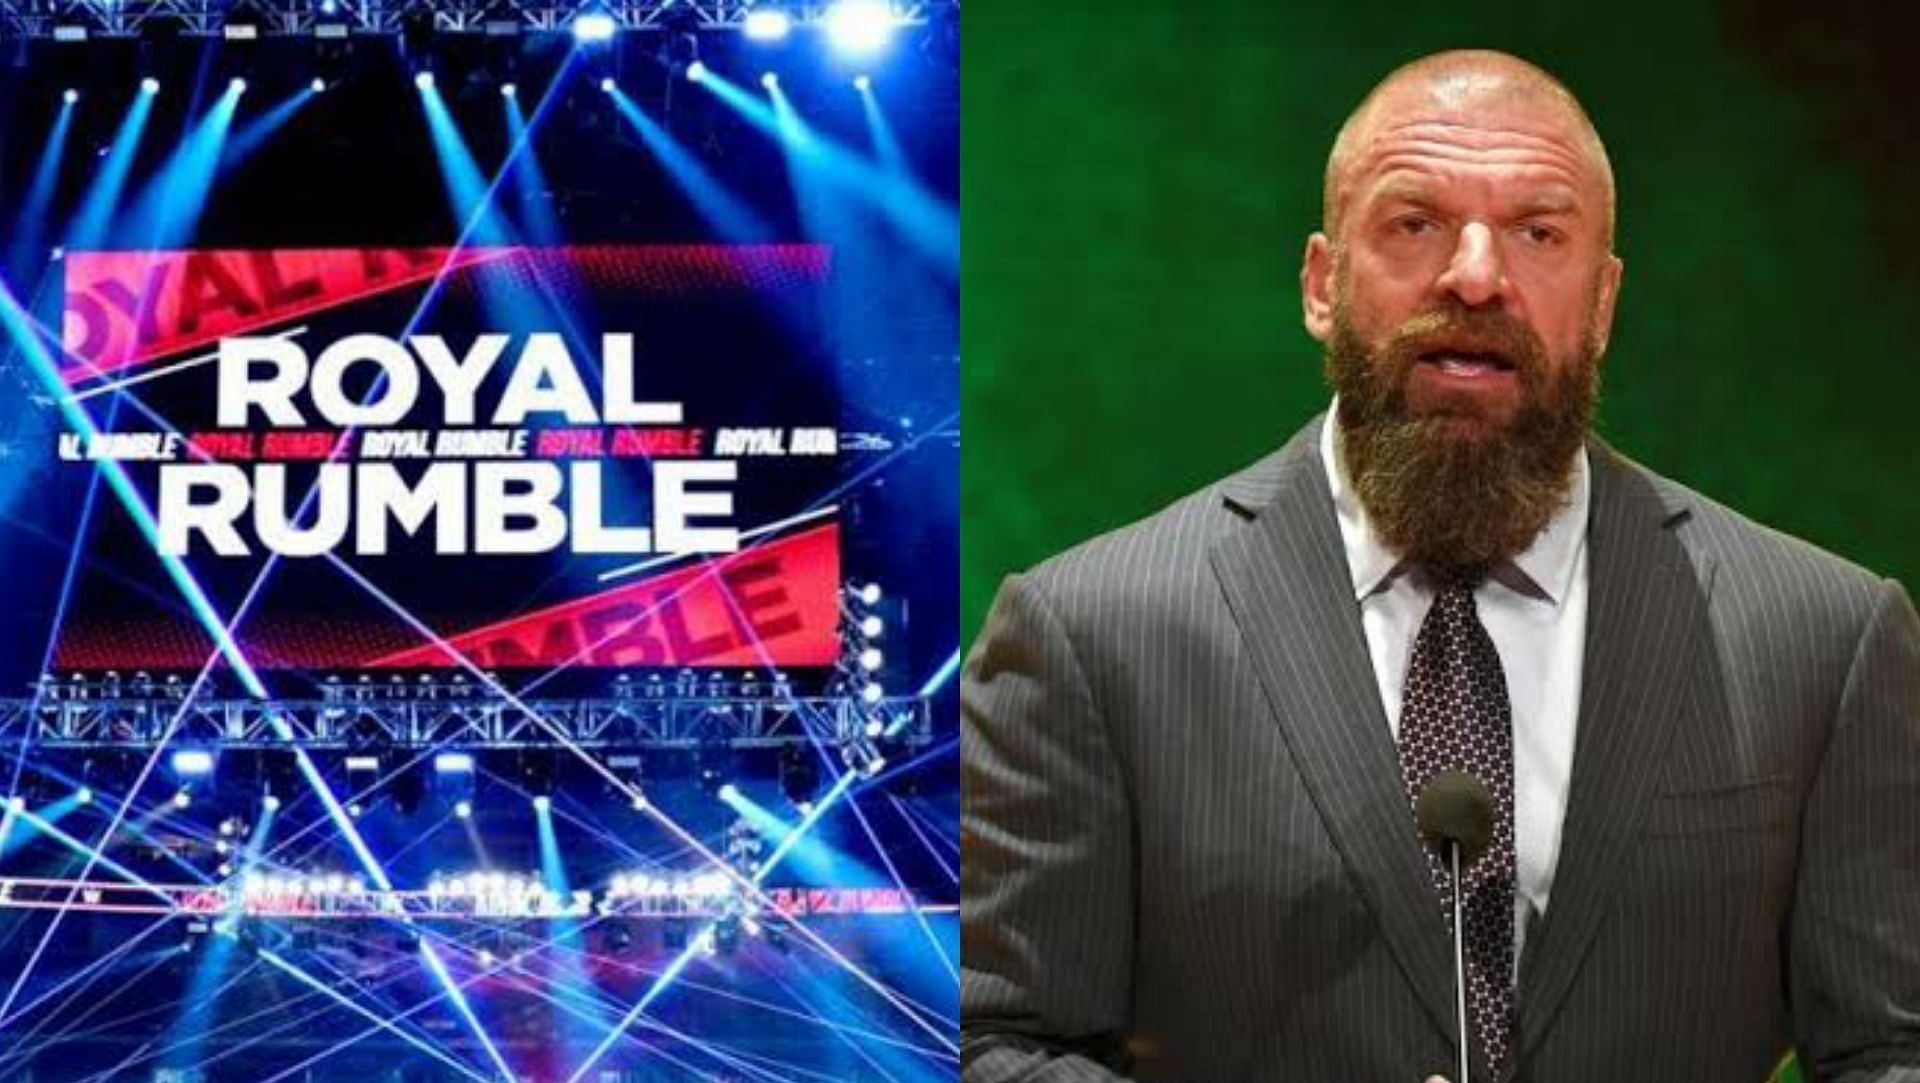 Some high-profile names could feature at the Royal Rumble 2023.